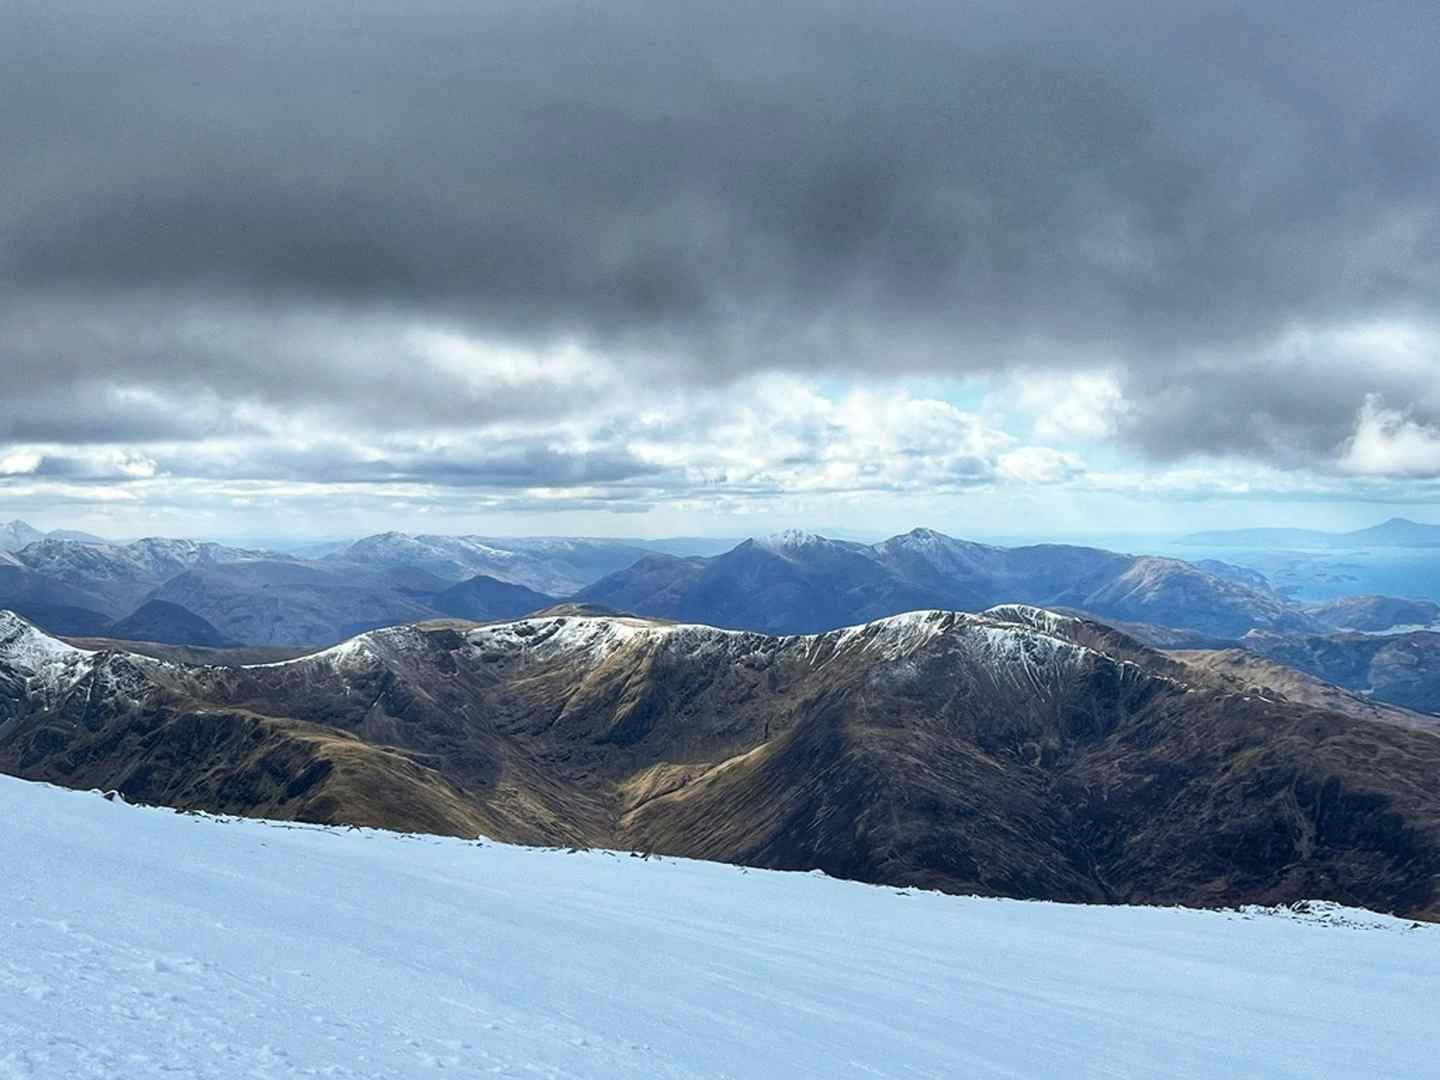 Great weekend in beautiful Highlands. Guide...